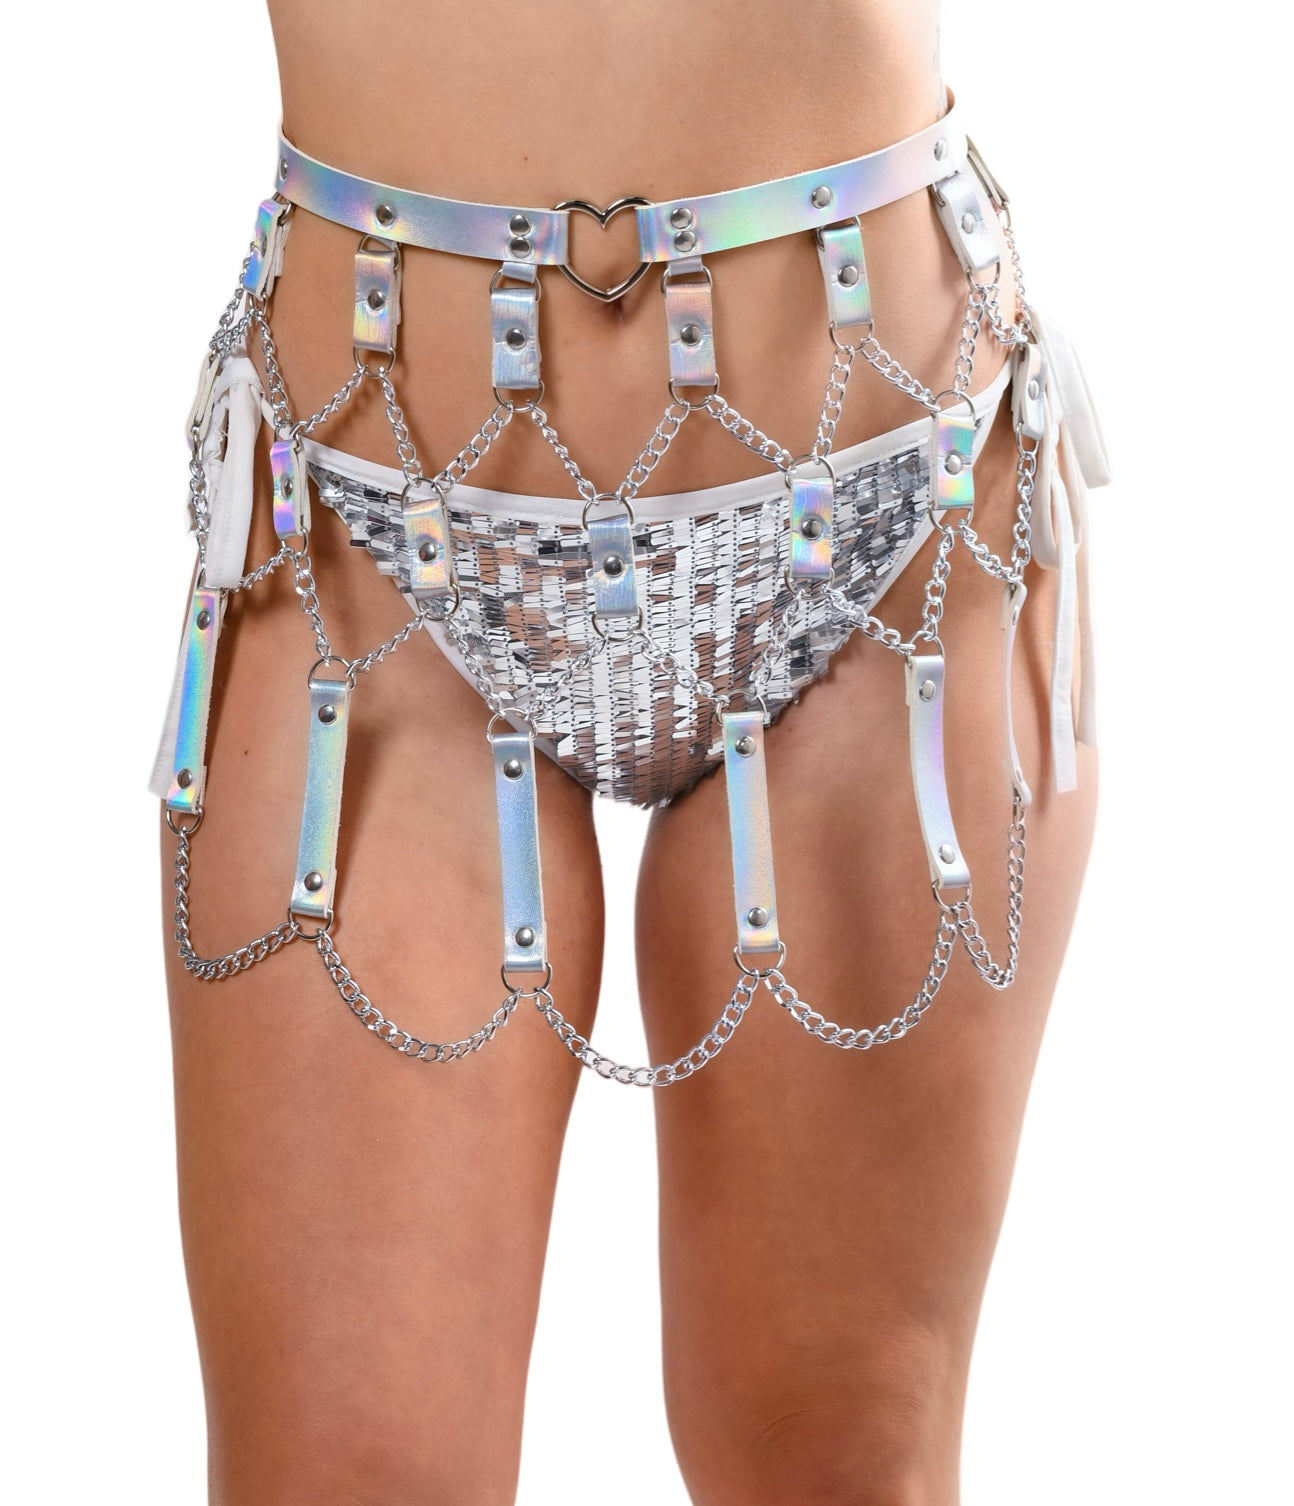 Holographic Heart Harness Skirt